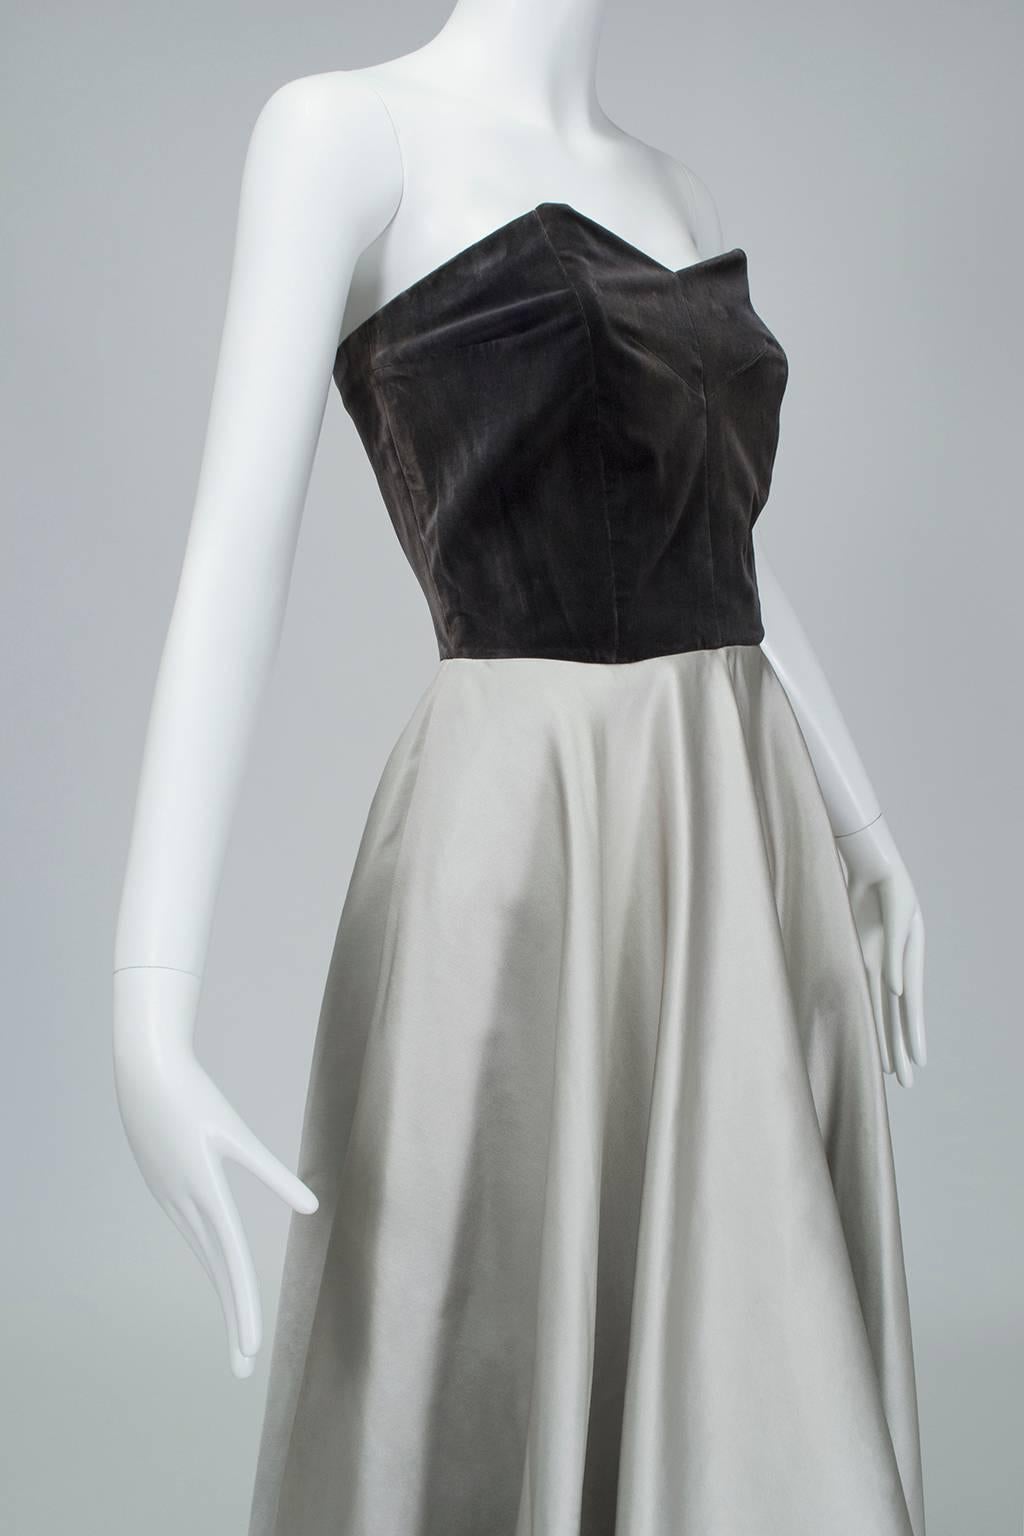 Bespoke Silver and Gray Duchess Satin Strapless Ball Gown, Paris - Medium, 1950s In Good Condition In Tucson, AZ